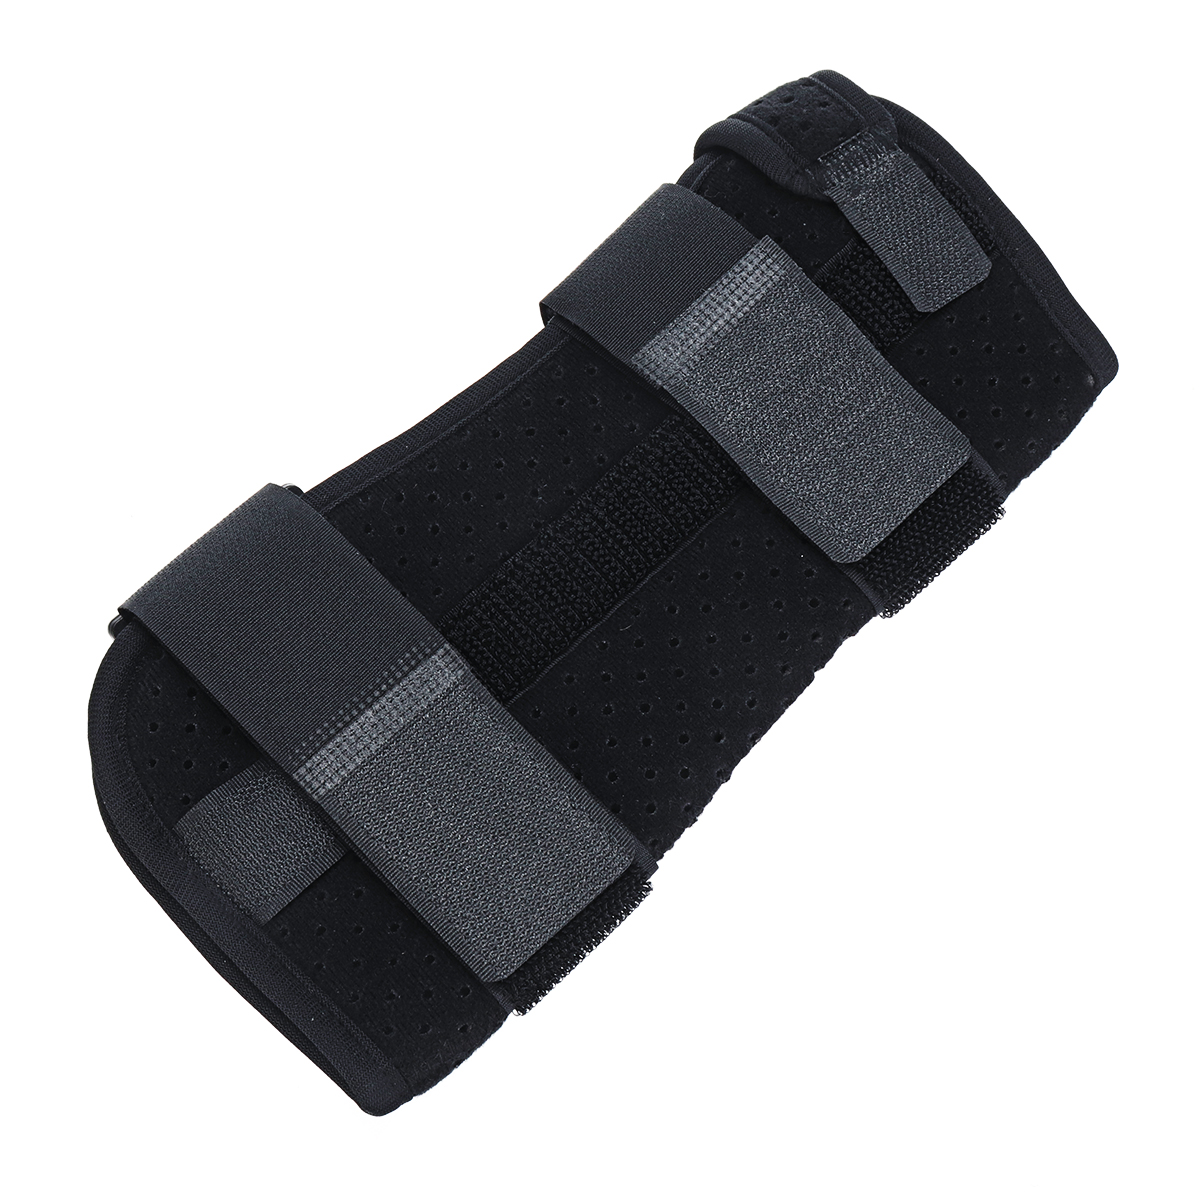 Breathable-Adjustable-Wrist-Support-Wrist-Brace-Wrist-Joint-Fixation-Sprain-Protector-Medical-Protec-1571406-4